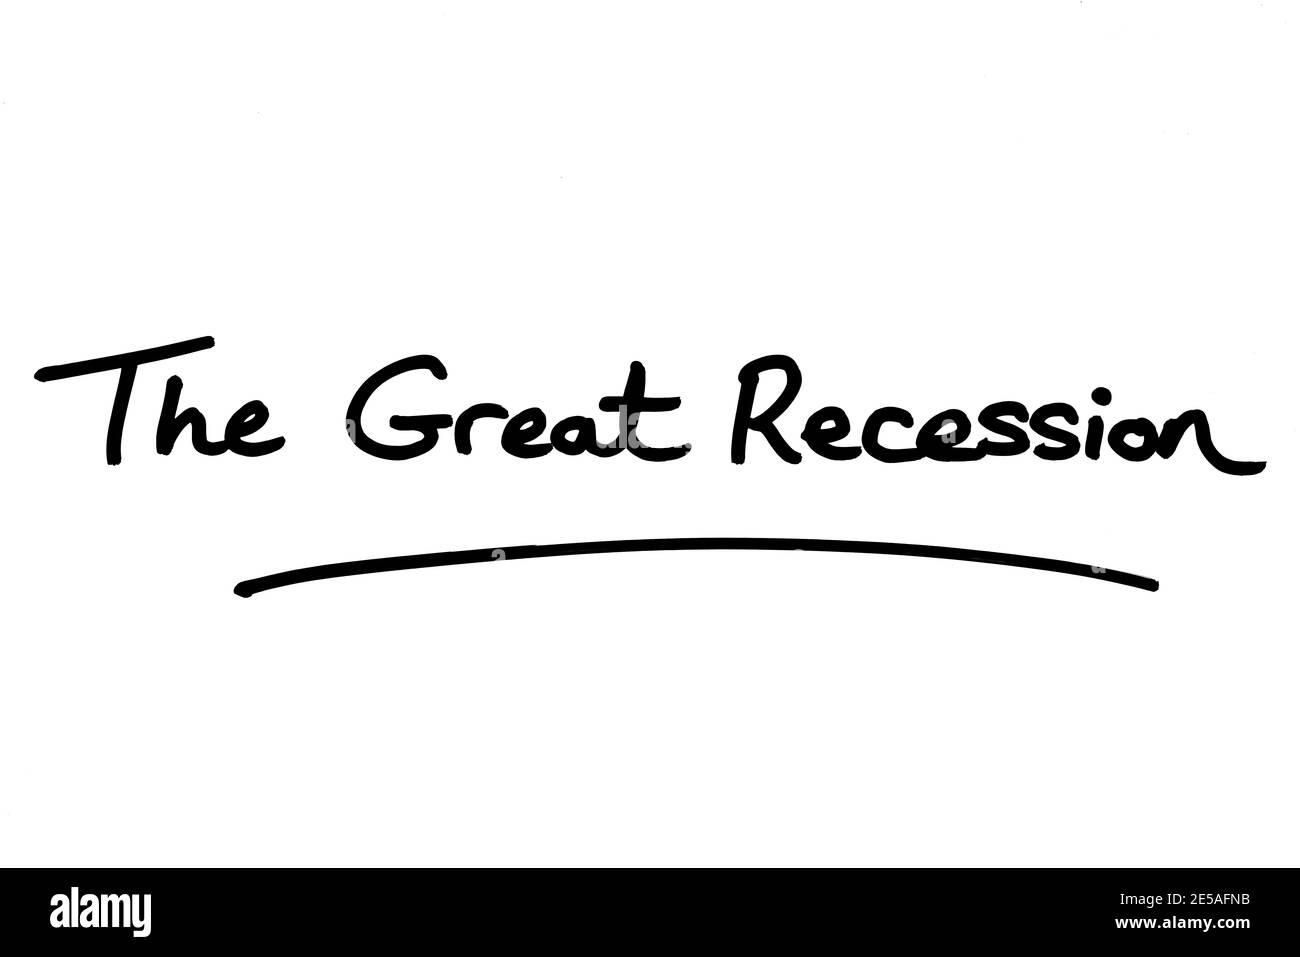 The Great Recession, handwritten on a white background. Stock Photo